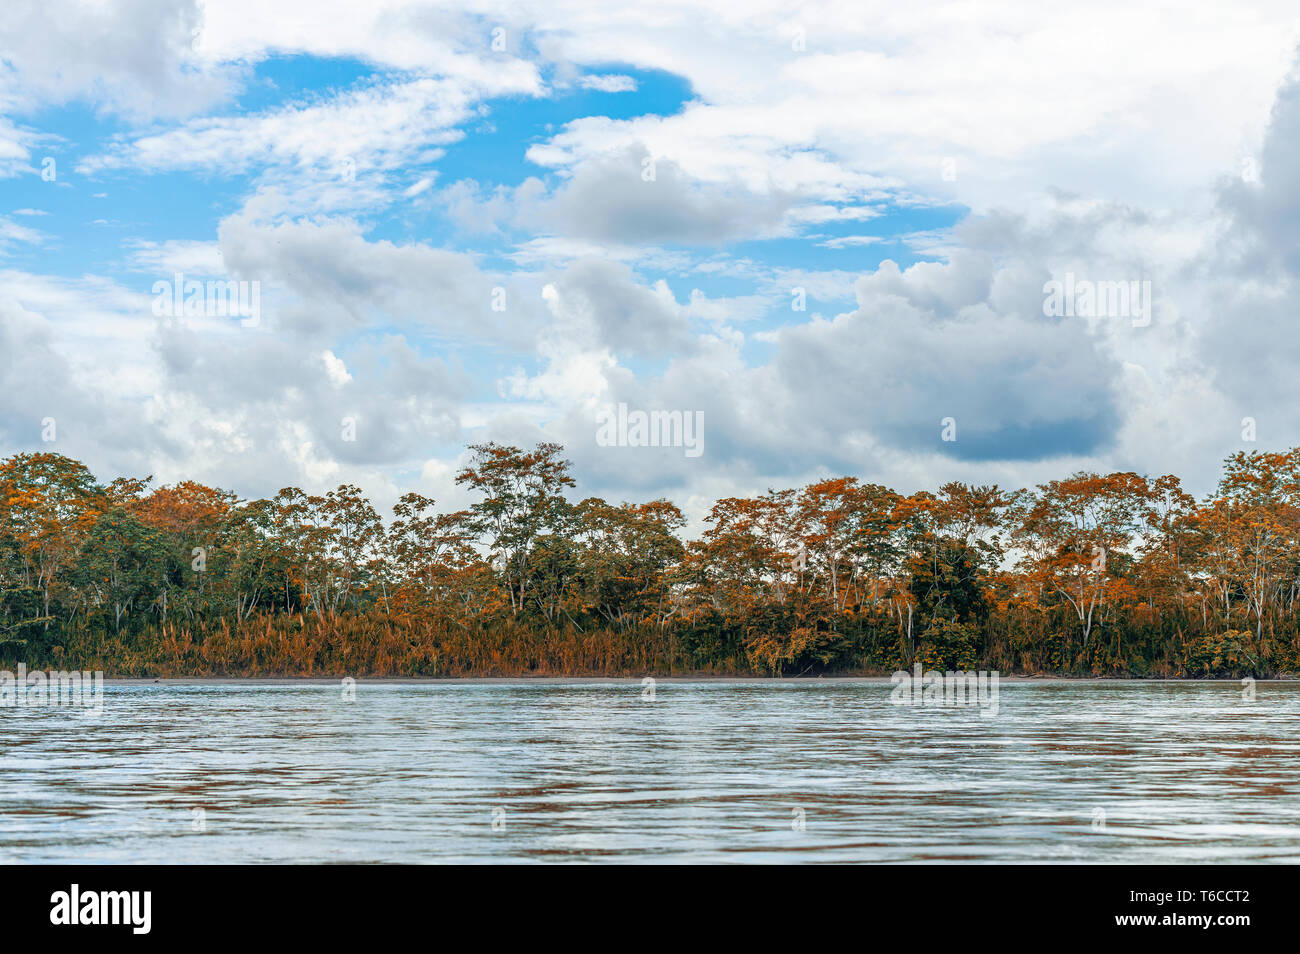 Napo river riverbank inside Yasuni national park with a view over the tropical rainforest with autumn colors in the Amazon Rainforest of Ecuador. Stock Photo